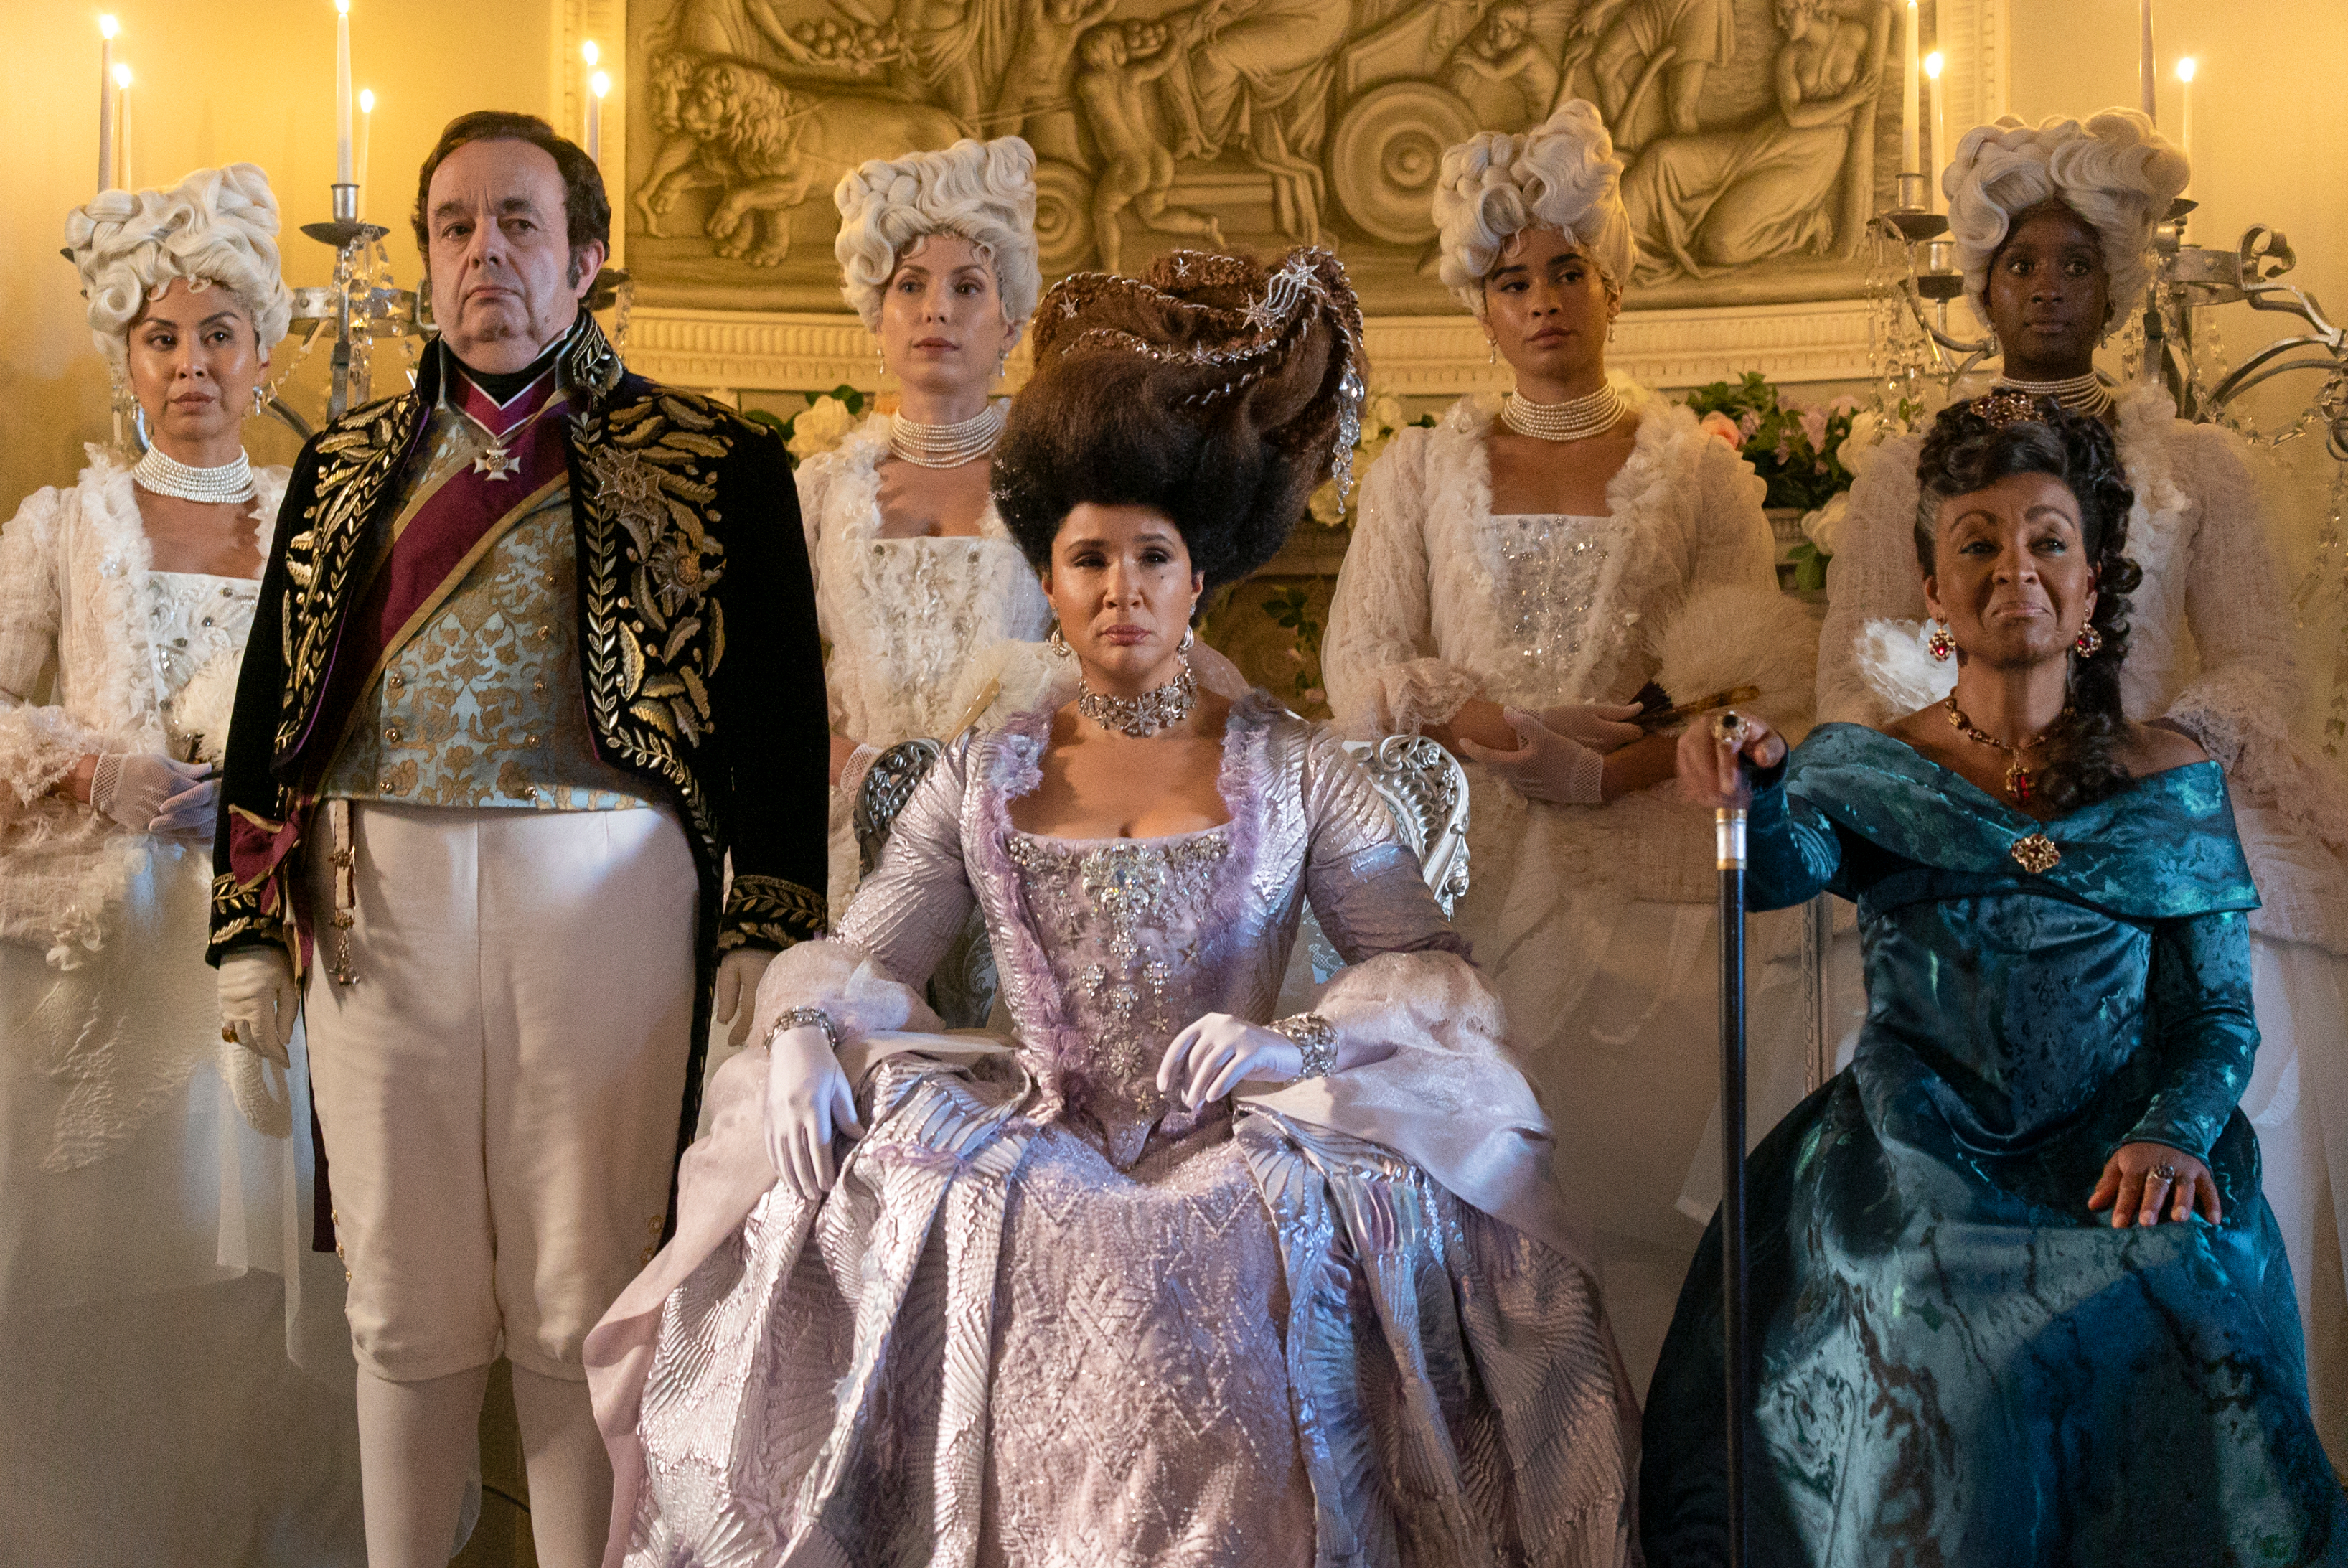 Cast in period costumes from a TV show, including characters in regal attire with elaborate hairstyles